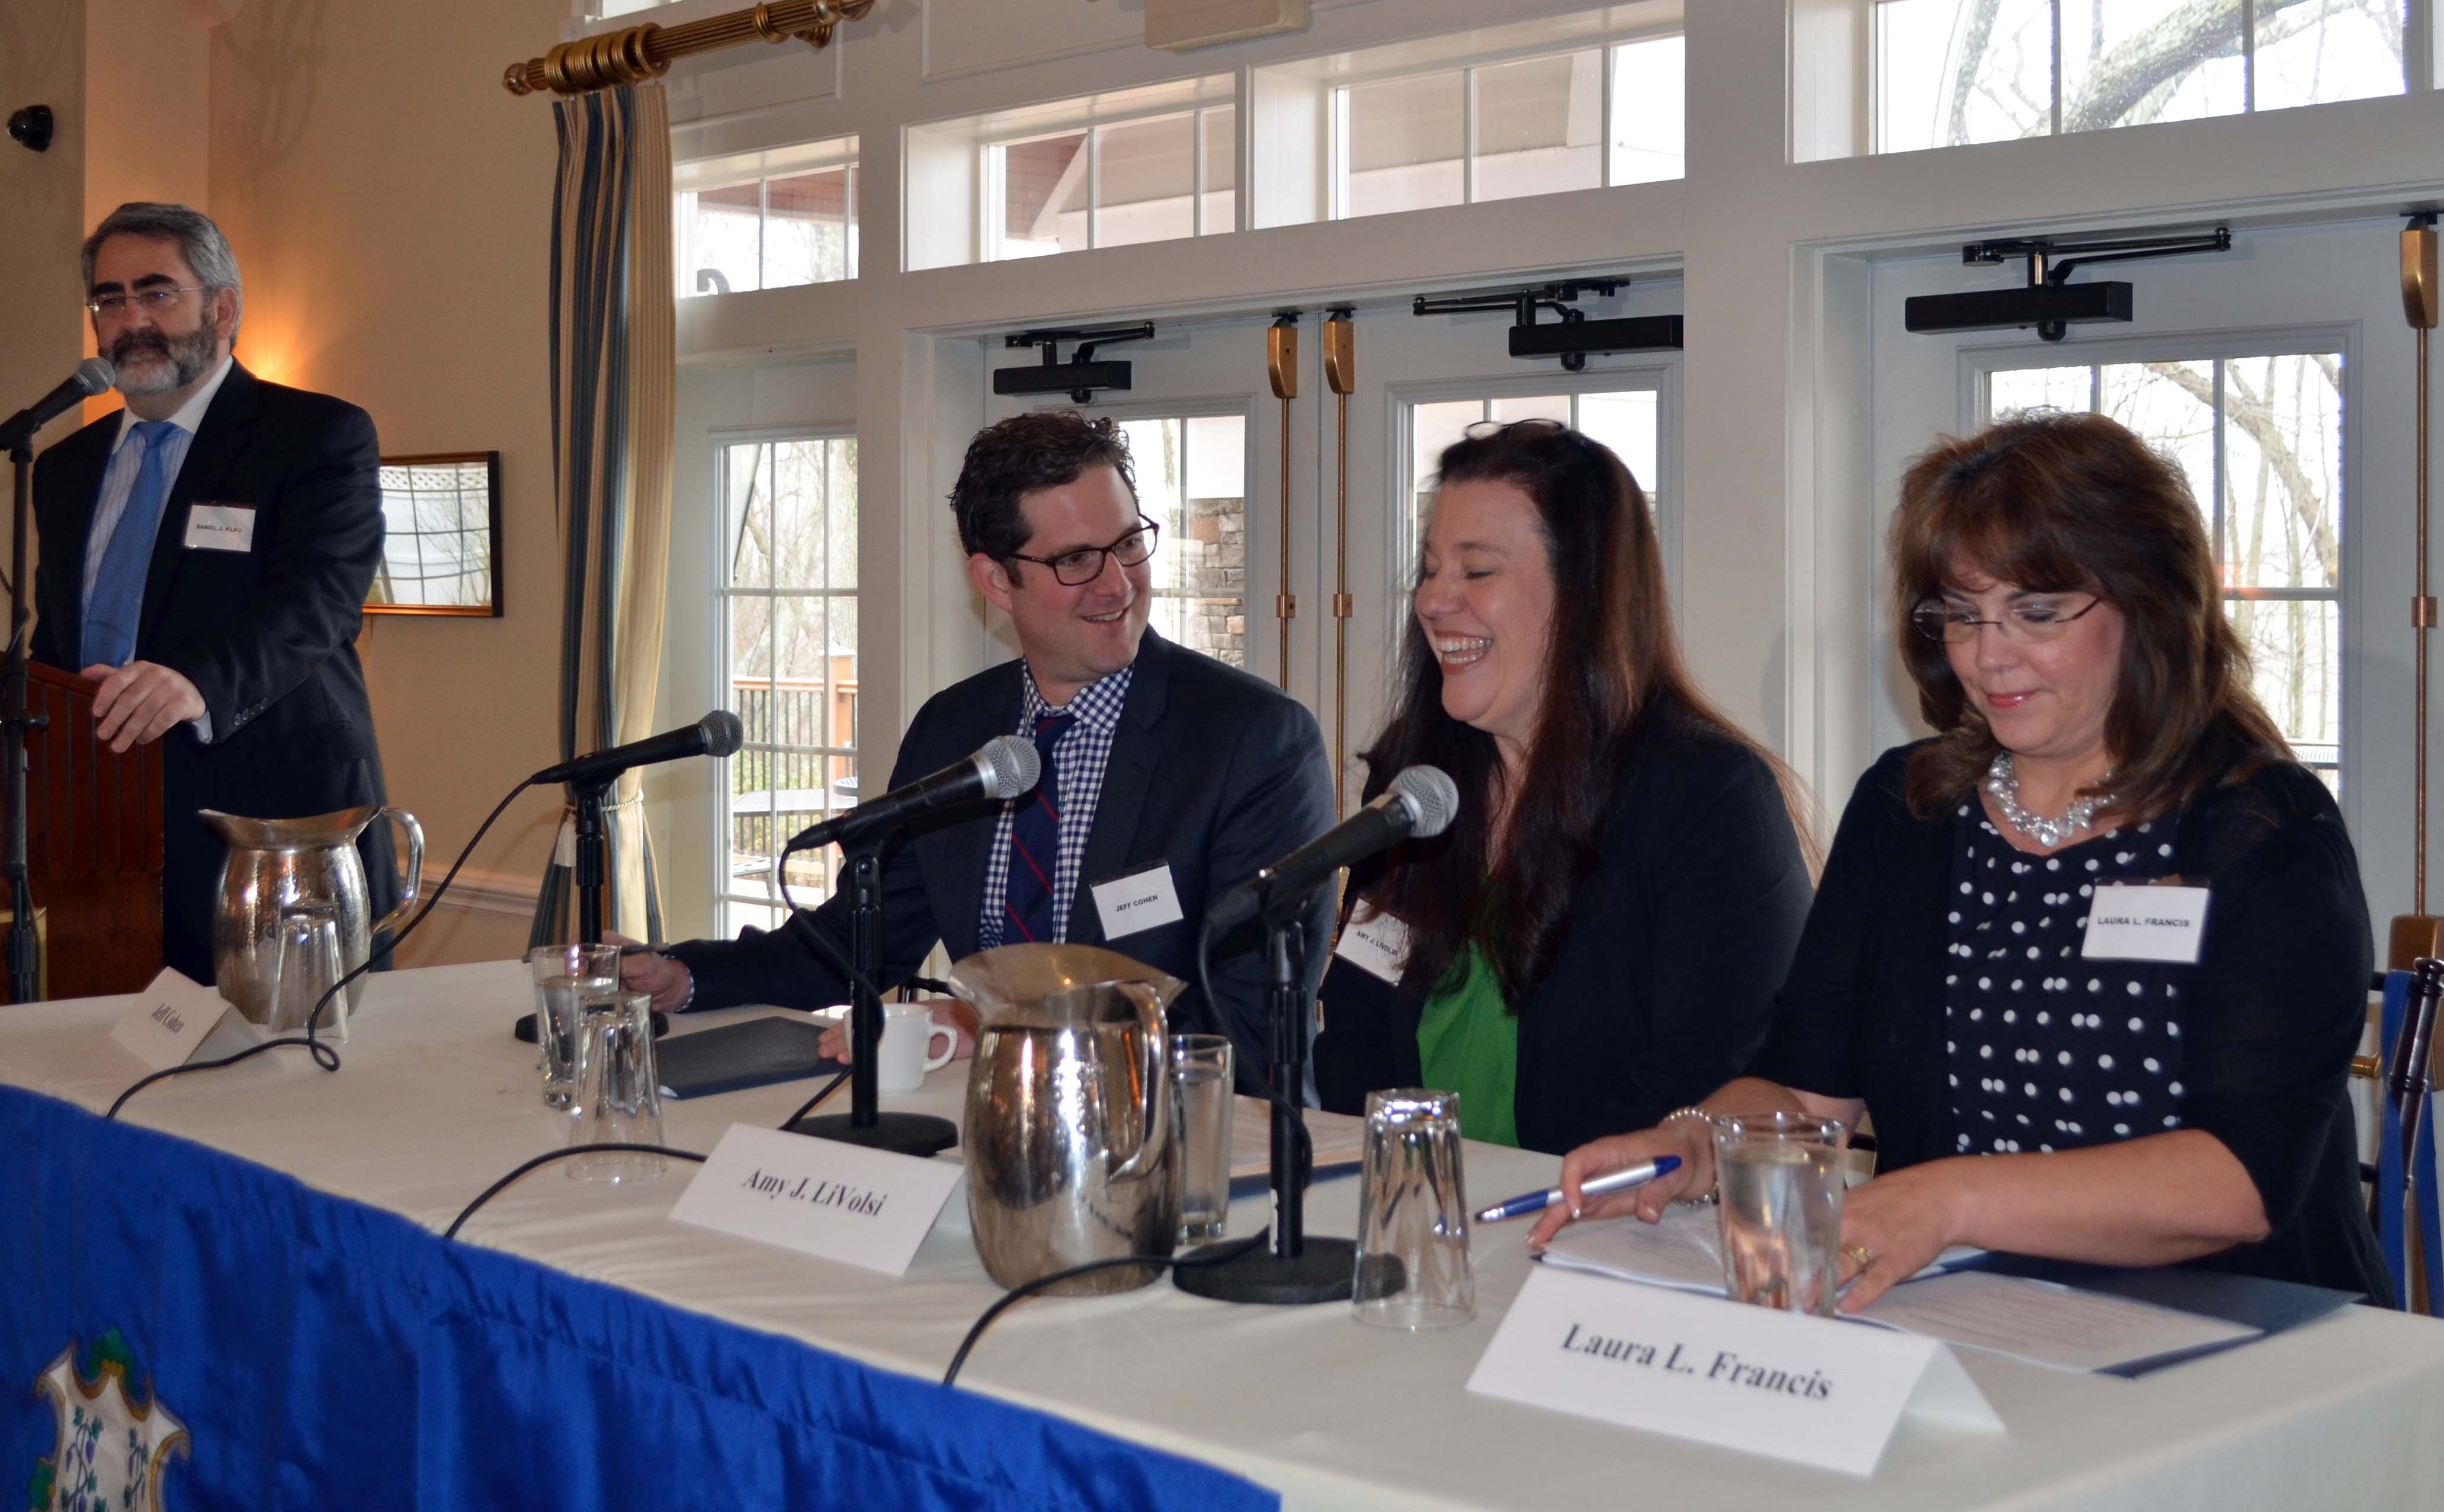 Daniel Klau with panelists (from left) Jeff Cohen, Laura L. Francis, Amy J. LiVolsi speaking on the panel topic “Open Meetings: